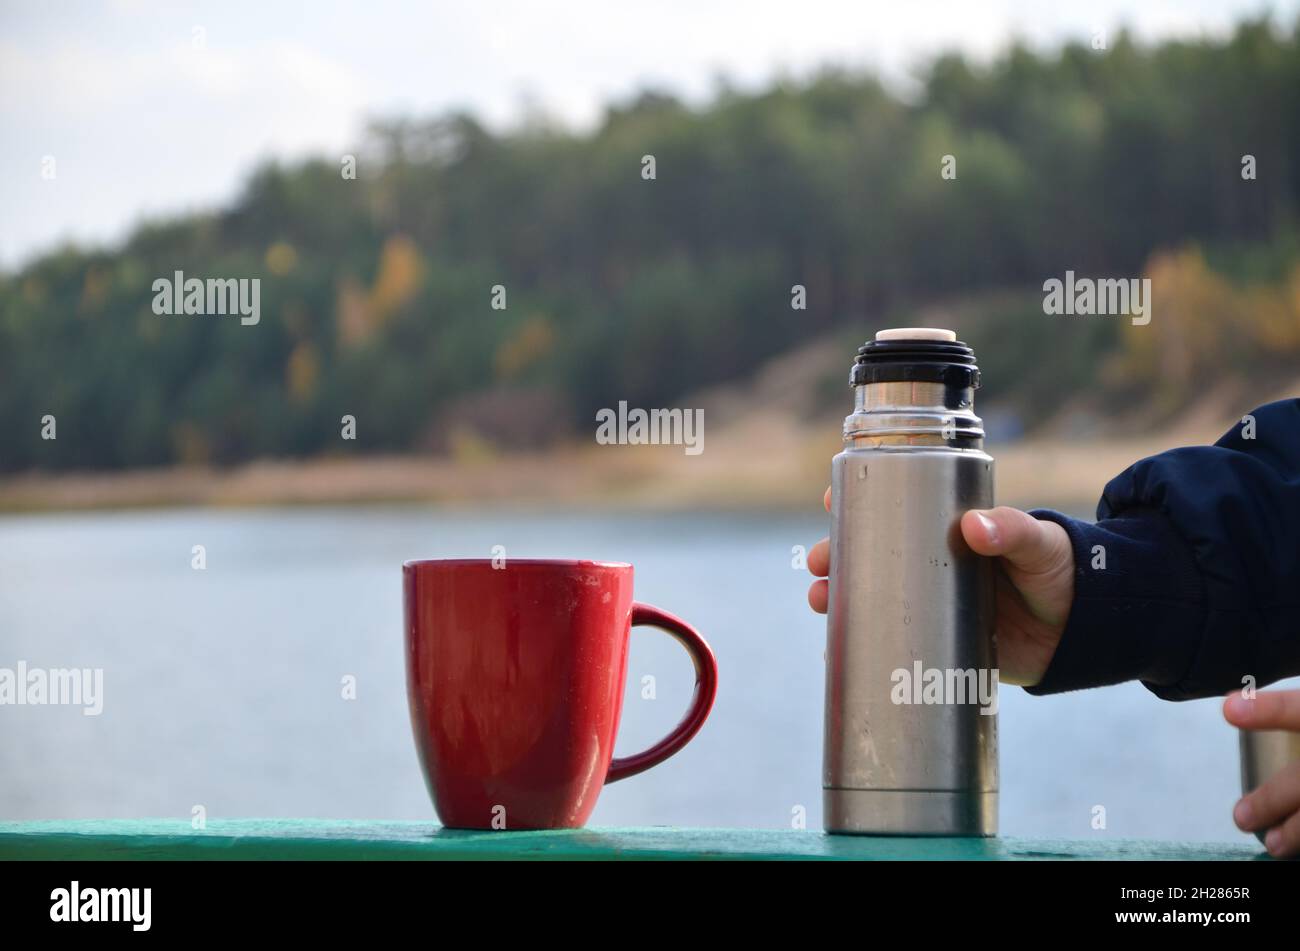 https://c8.alamy.com/comp/2H2865R/the-guy-is-holding-a-black-stylish-eco-friendly-stainless-steel-thermos-and-pours-hot-herbal-tea-into-a-mug-outdoors-on-a-sunny-autumn-day-near-the-l-2H2865R.jpg